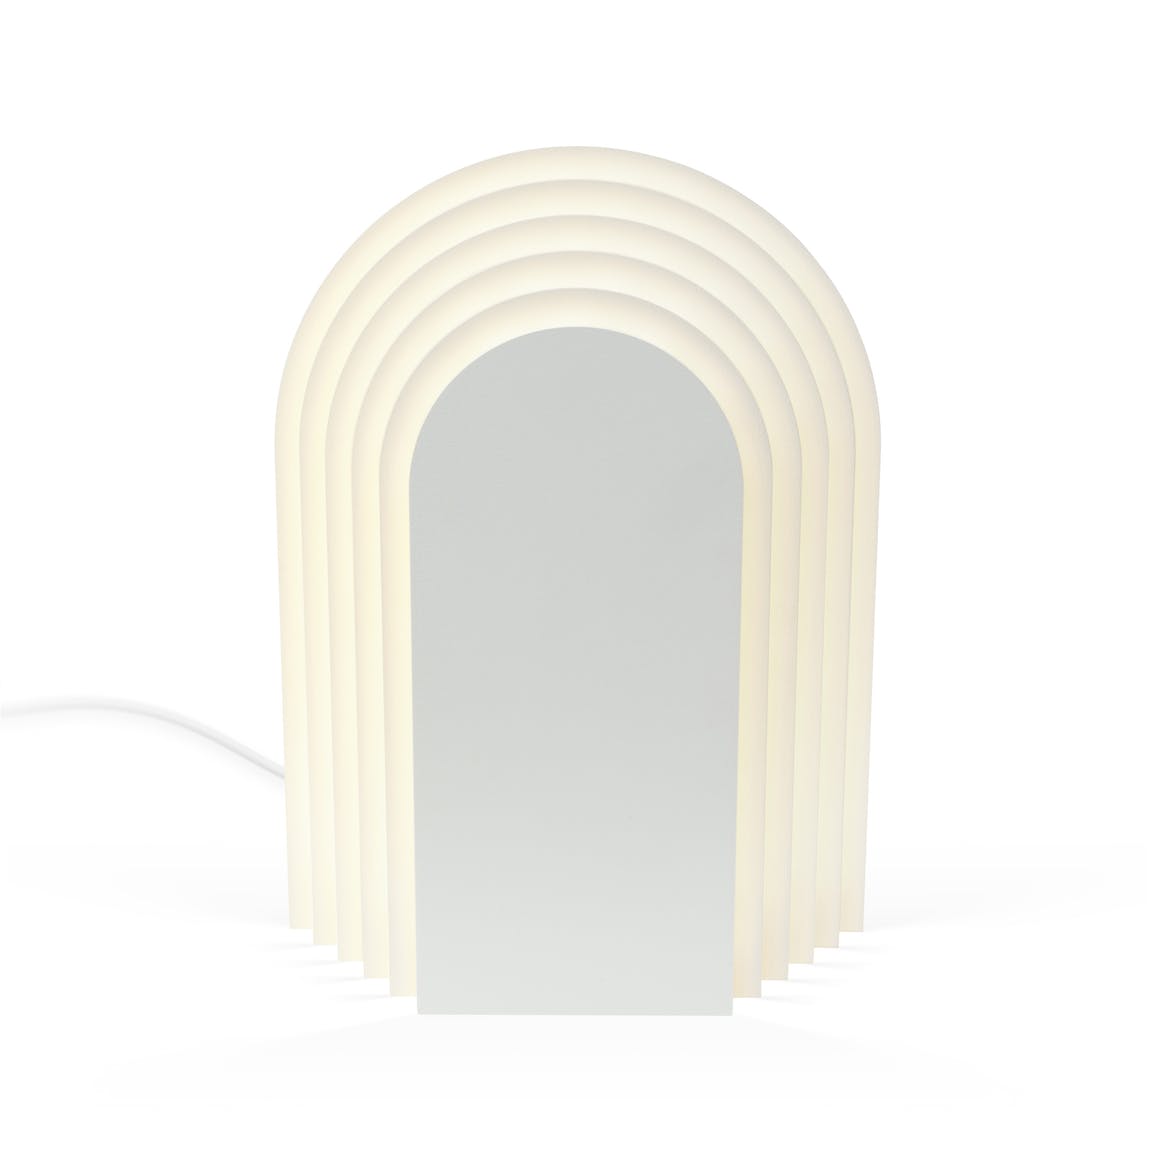 Cemi Lamp - THAT COOL LIVING